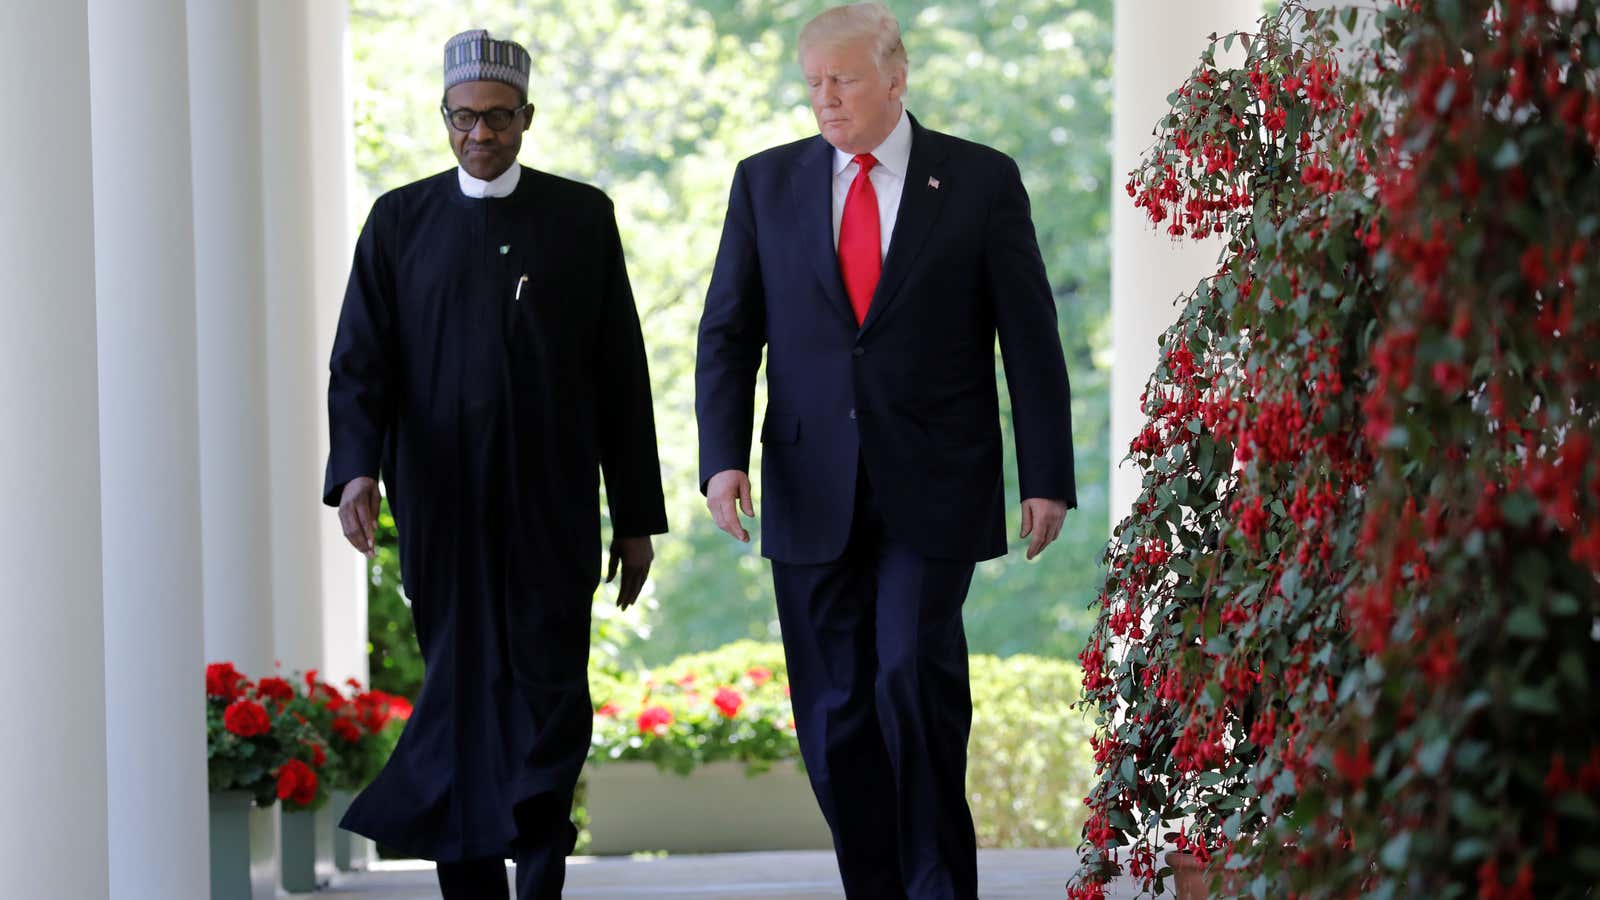 US president Donald Trump and Nigeria’s president Muhammadu Buhari at the White House in 2018